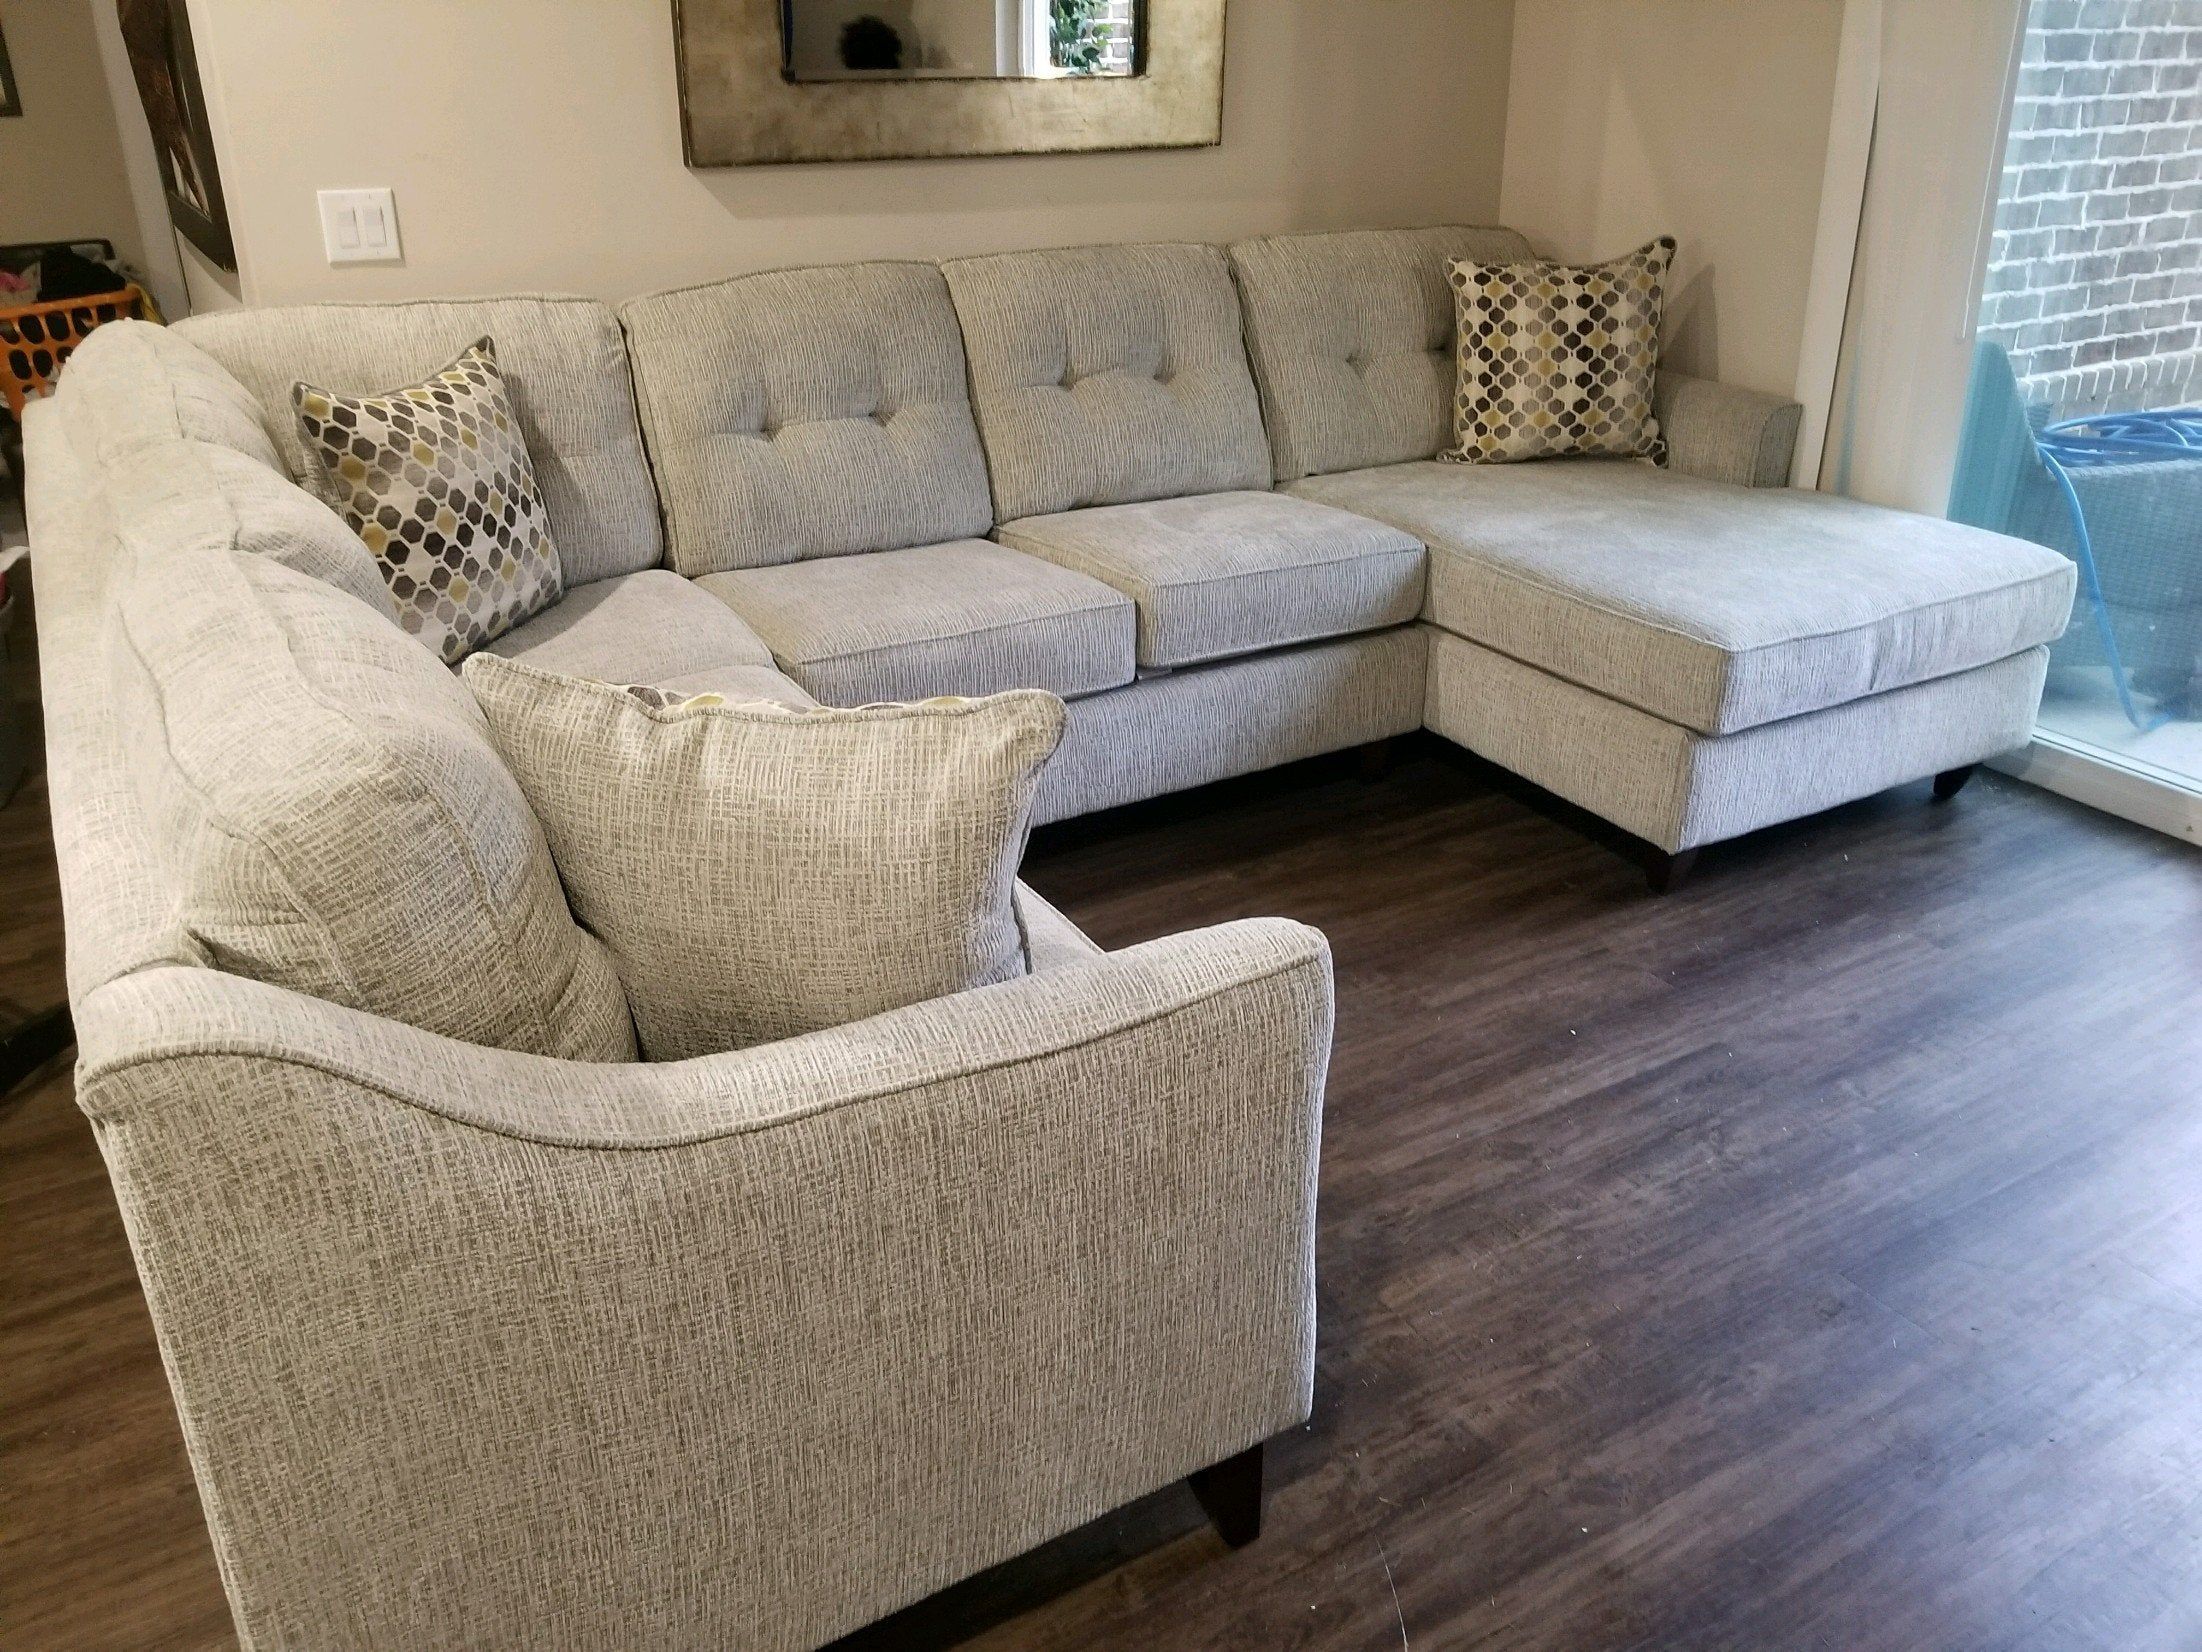 Sydney Cream Sectional Sofa Set – Afurniturecompany Within Sofas In Cream (Gallery 12 of 20)